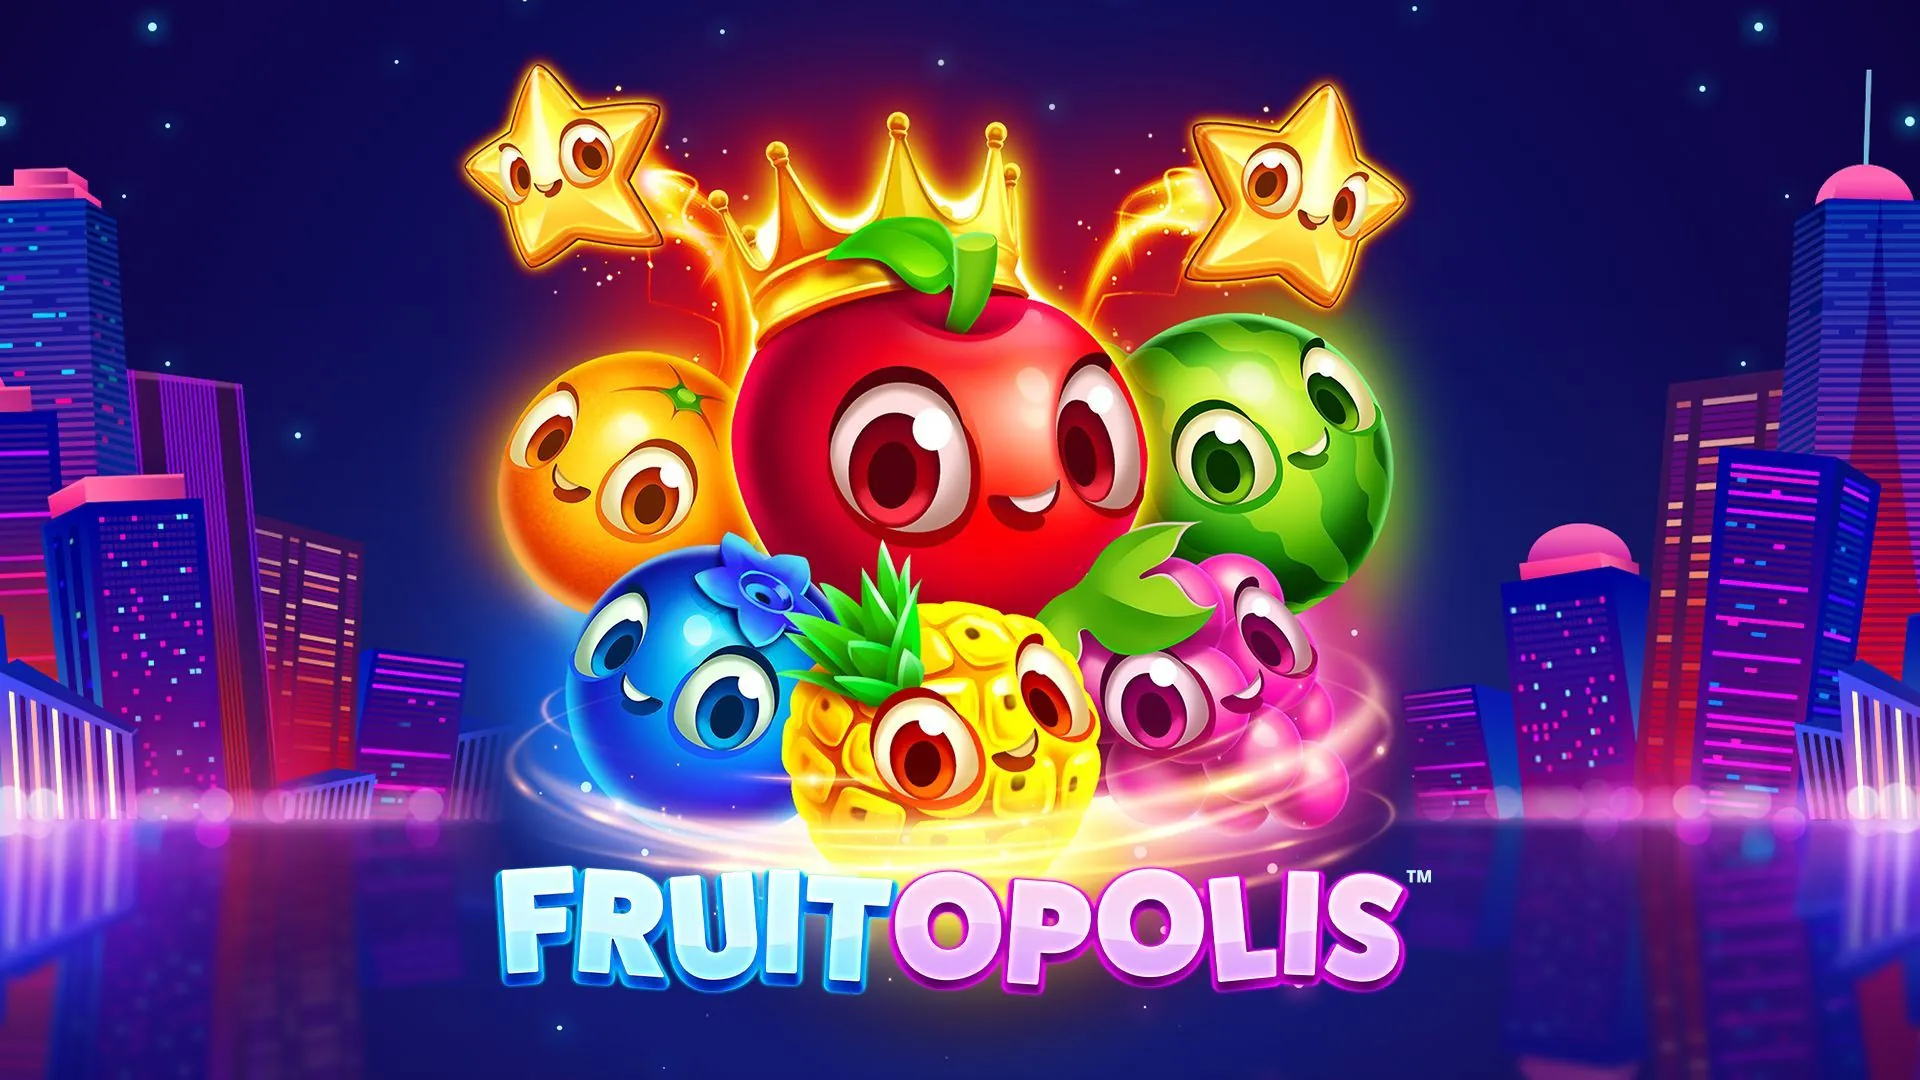 Our latest Juicy game Fruitopolis is Out Today!